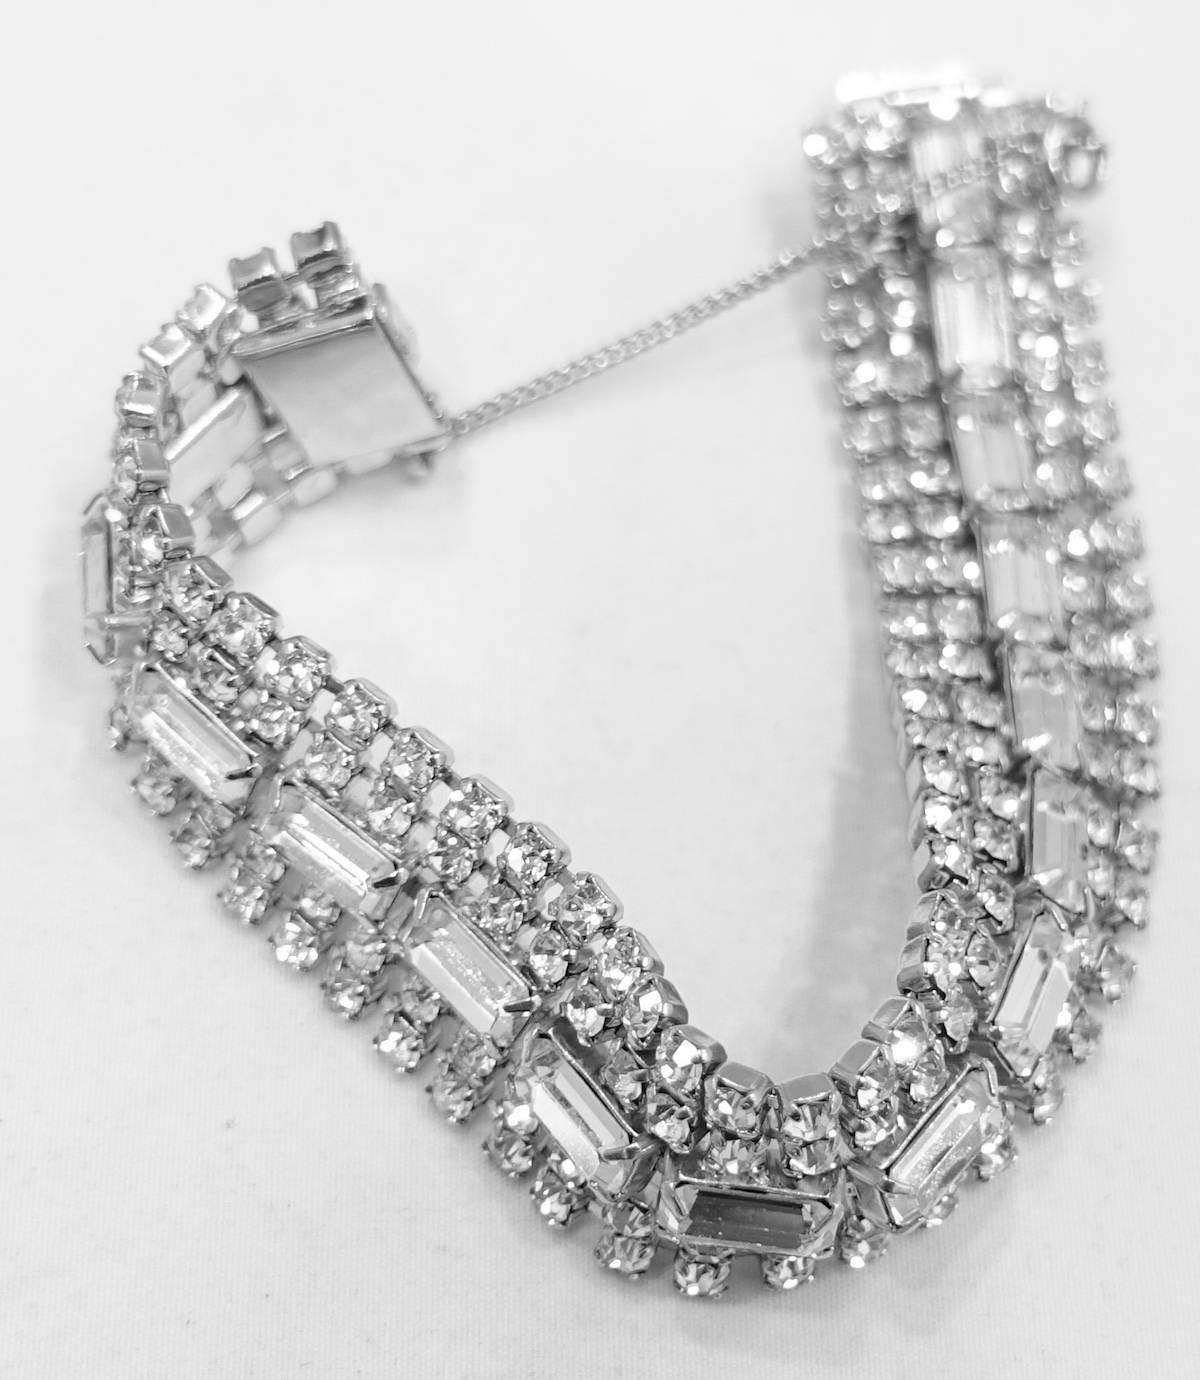 This vintage 1950s bracelet features brilliant clear crystals in a rhodium silver tone setting.  In excellent condition, this bracelet measures 7-3/8” x 3/4” and has a slide in closure.